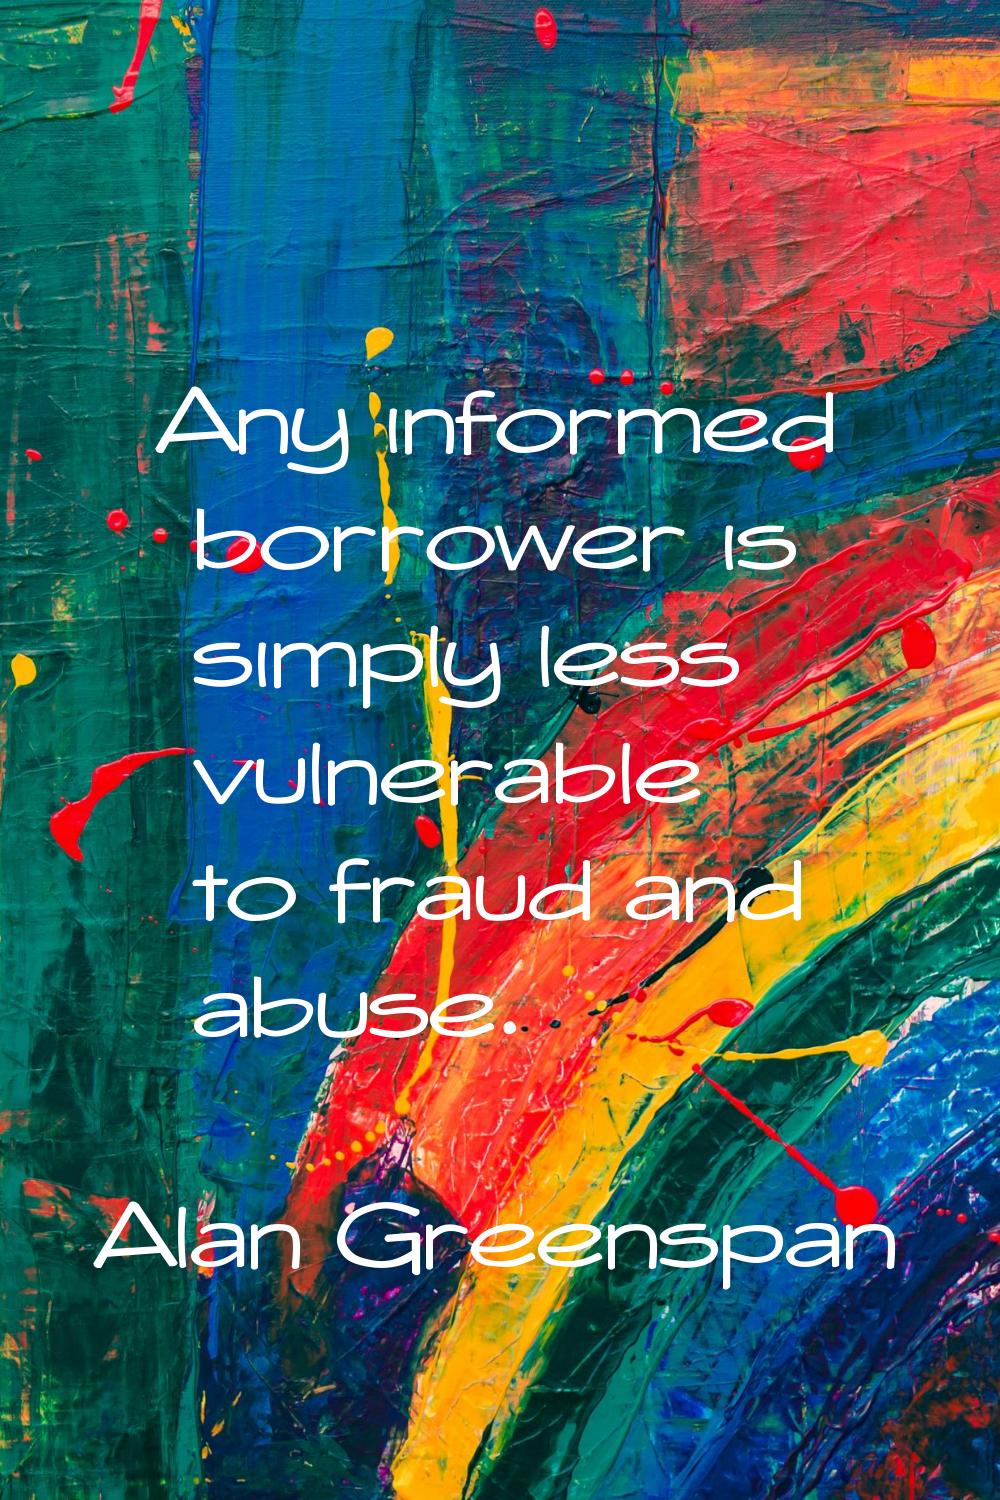 Any informed borrower is simply less vulnerable to fraud and abuse.